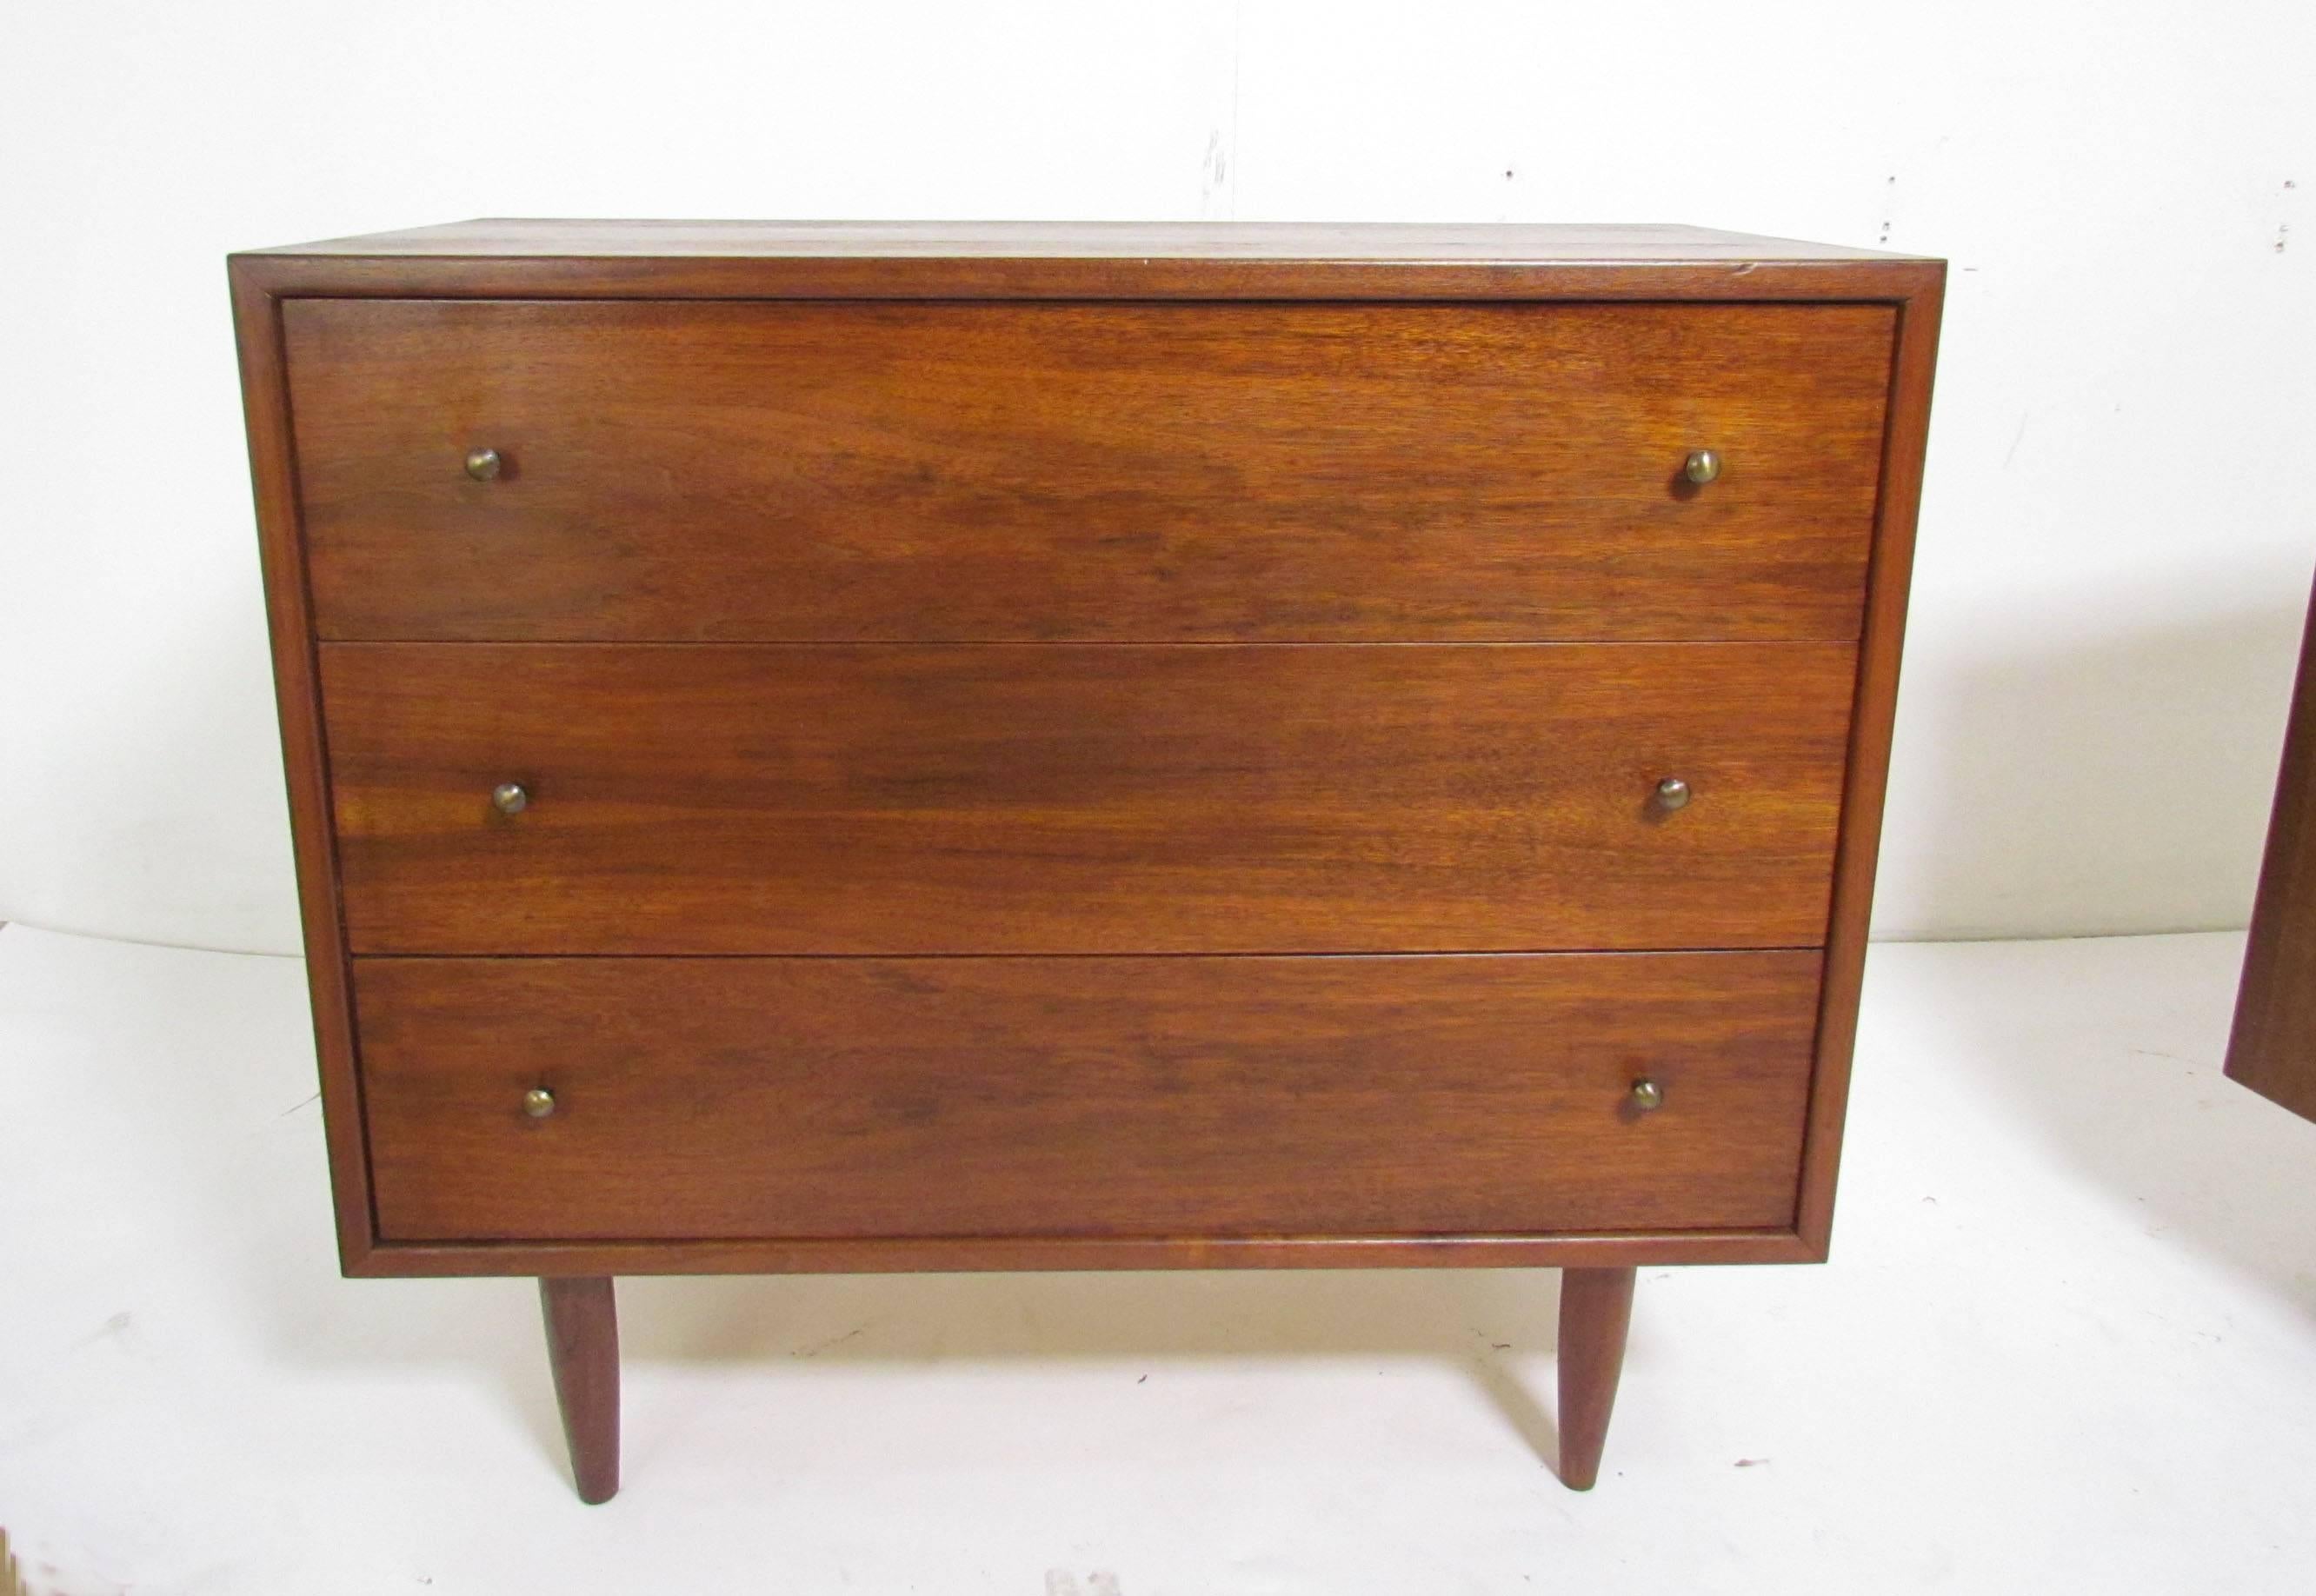 Attractive pair of Mid-Century Modern three-drawer dressers in solid walnut with brass pulls, circa 1960s.